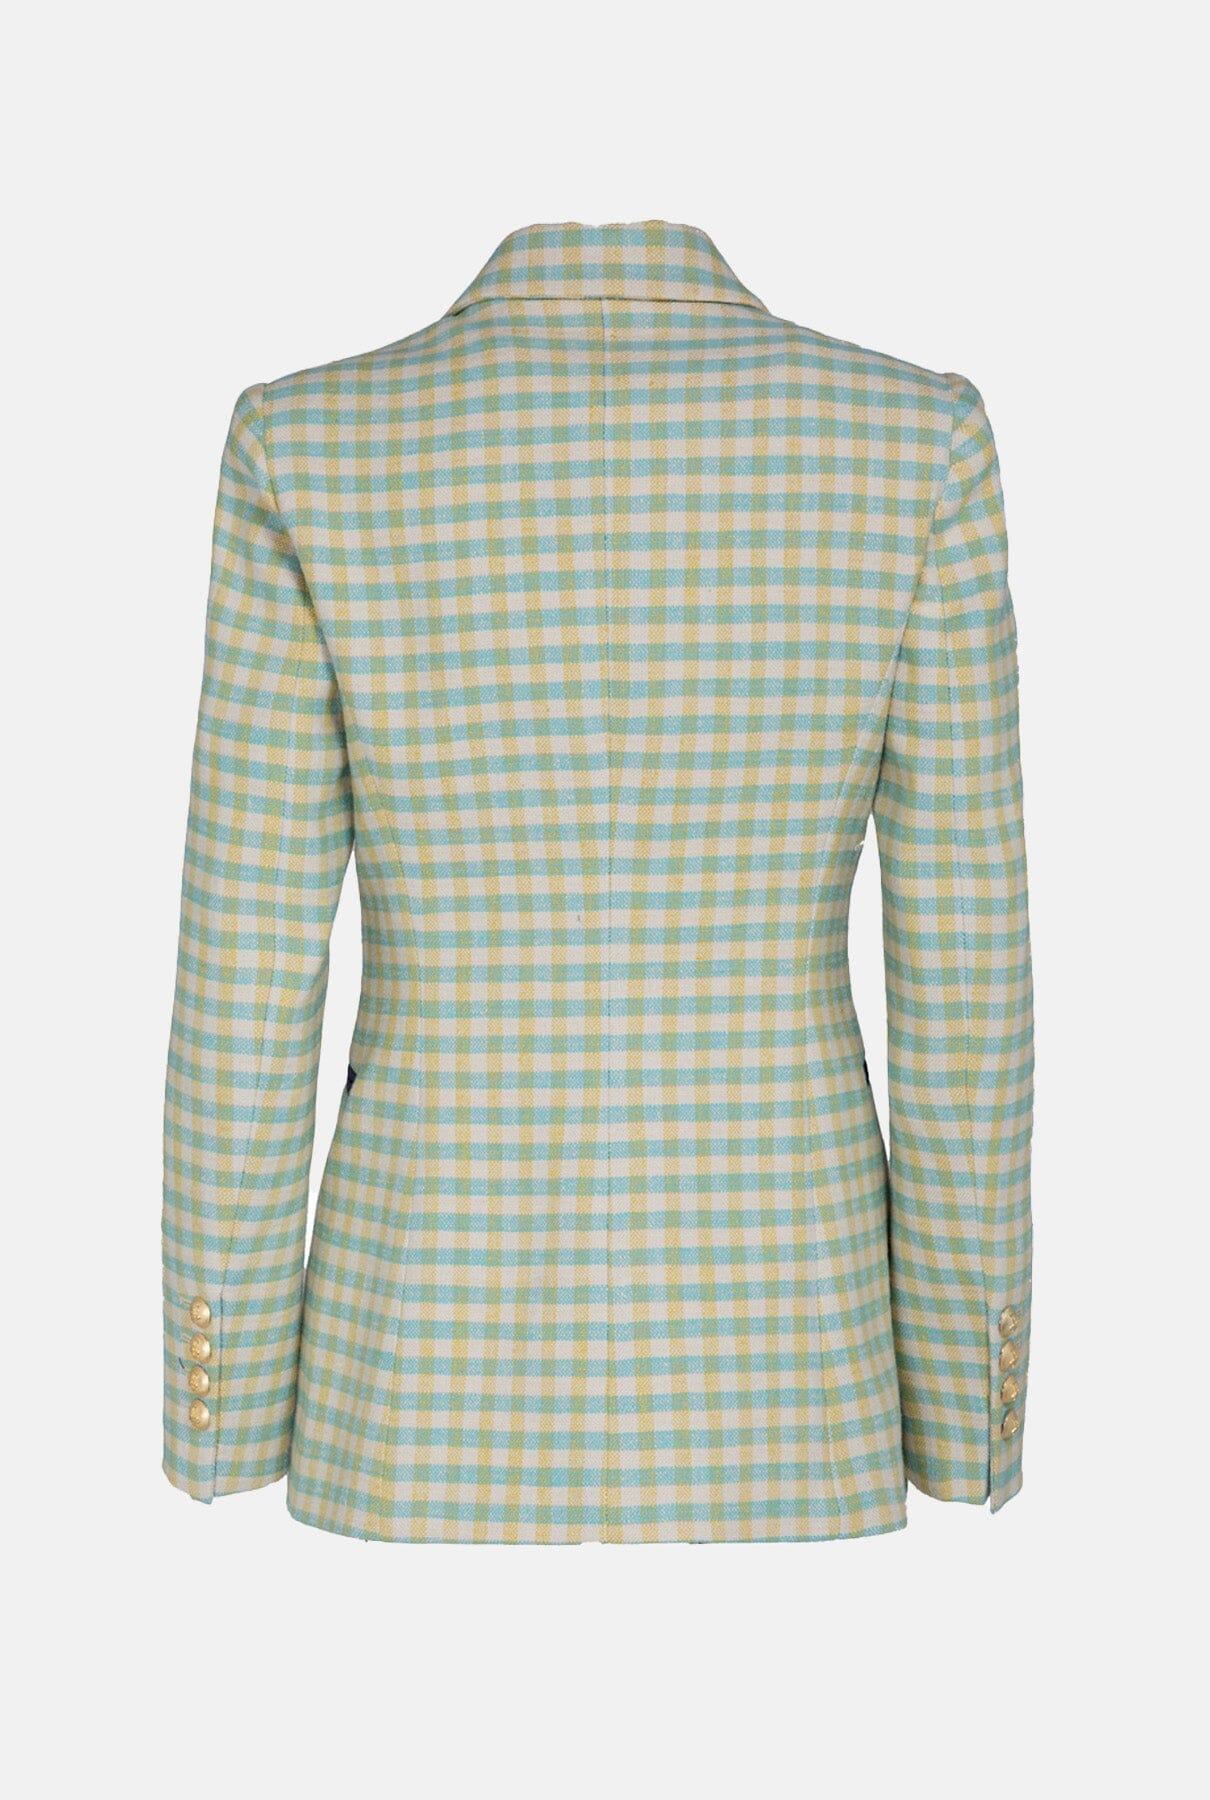 BLUE GINGHAM VICHY FIONA BLAZER Jackets The Extreme Collection 